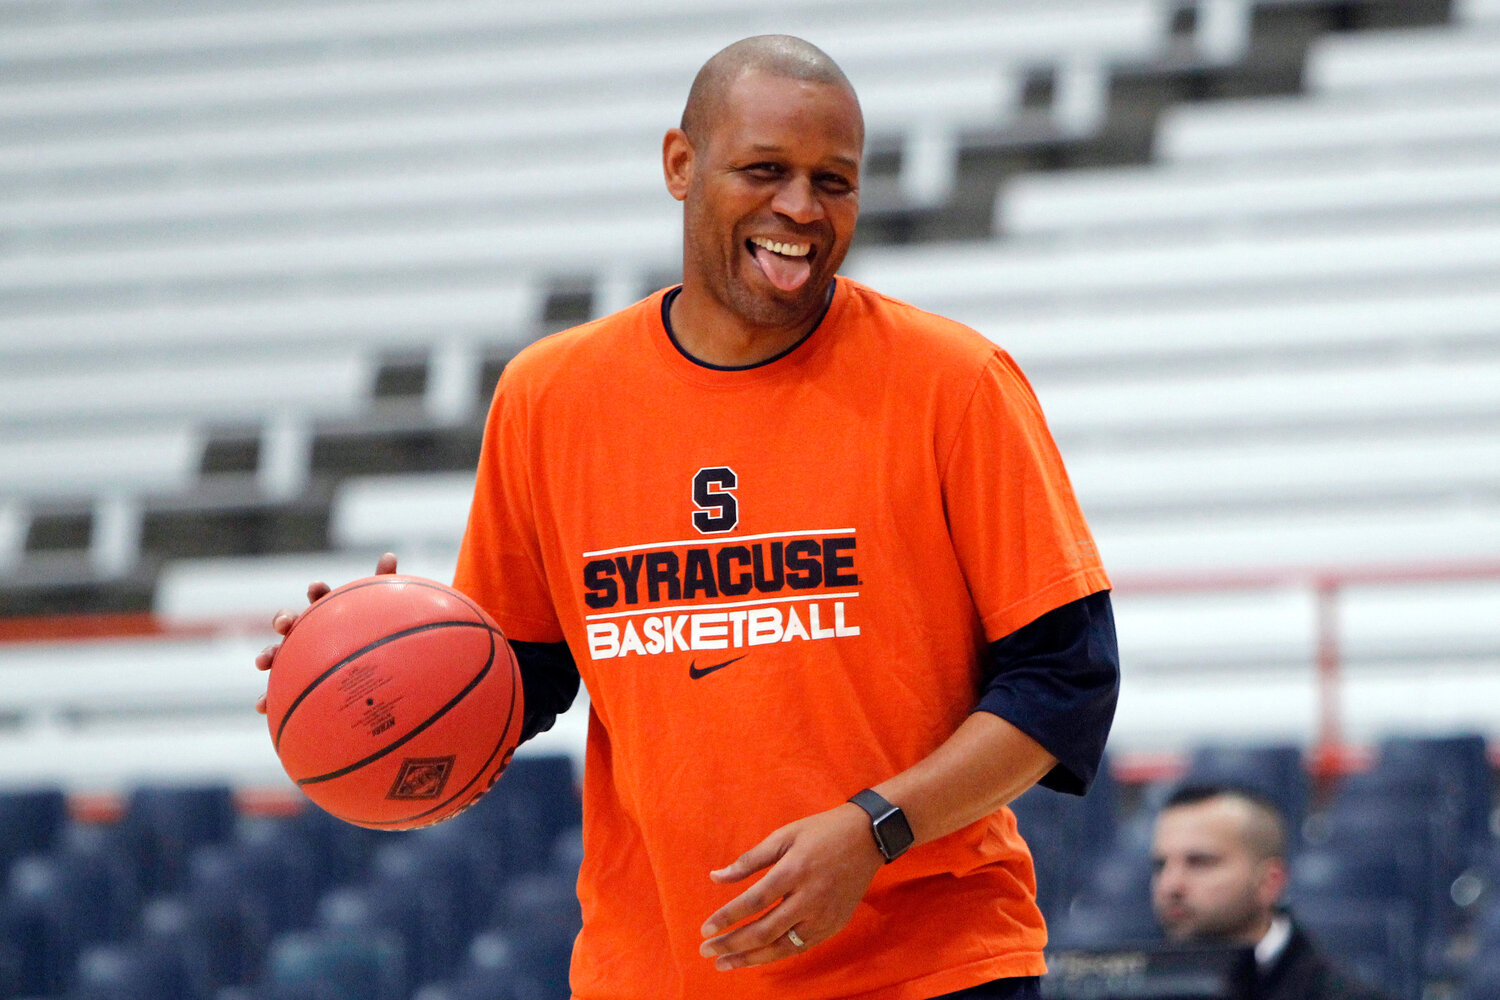 Syracuse assistant coach Adrian Autry jokes with players before an NIT game against Mississippi on March 18 in Syracuse. Syracuse formally introduced Autry as the new men's basketball coach Adrian, but it turned into more of a celebration of Jim Boeheim, the Hall of Fame coach Autry is succeeding.